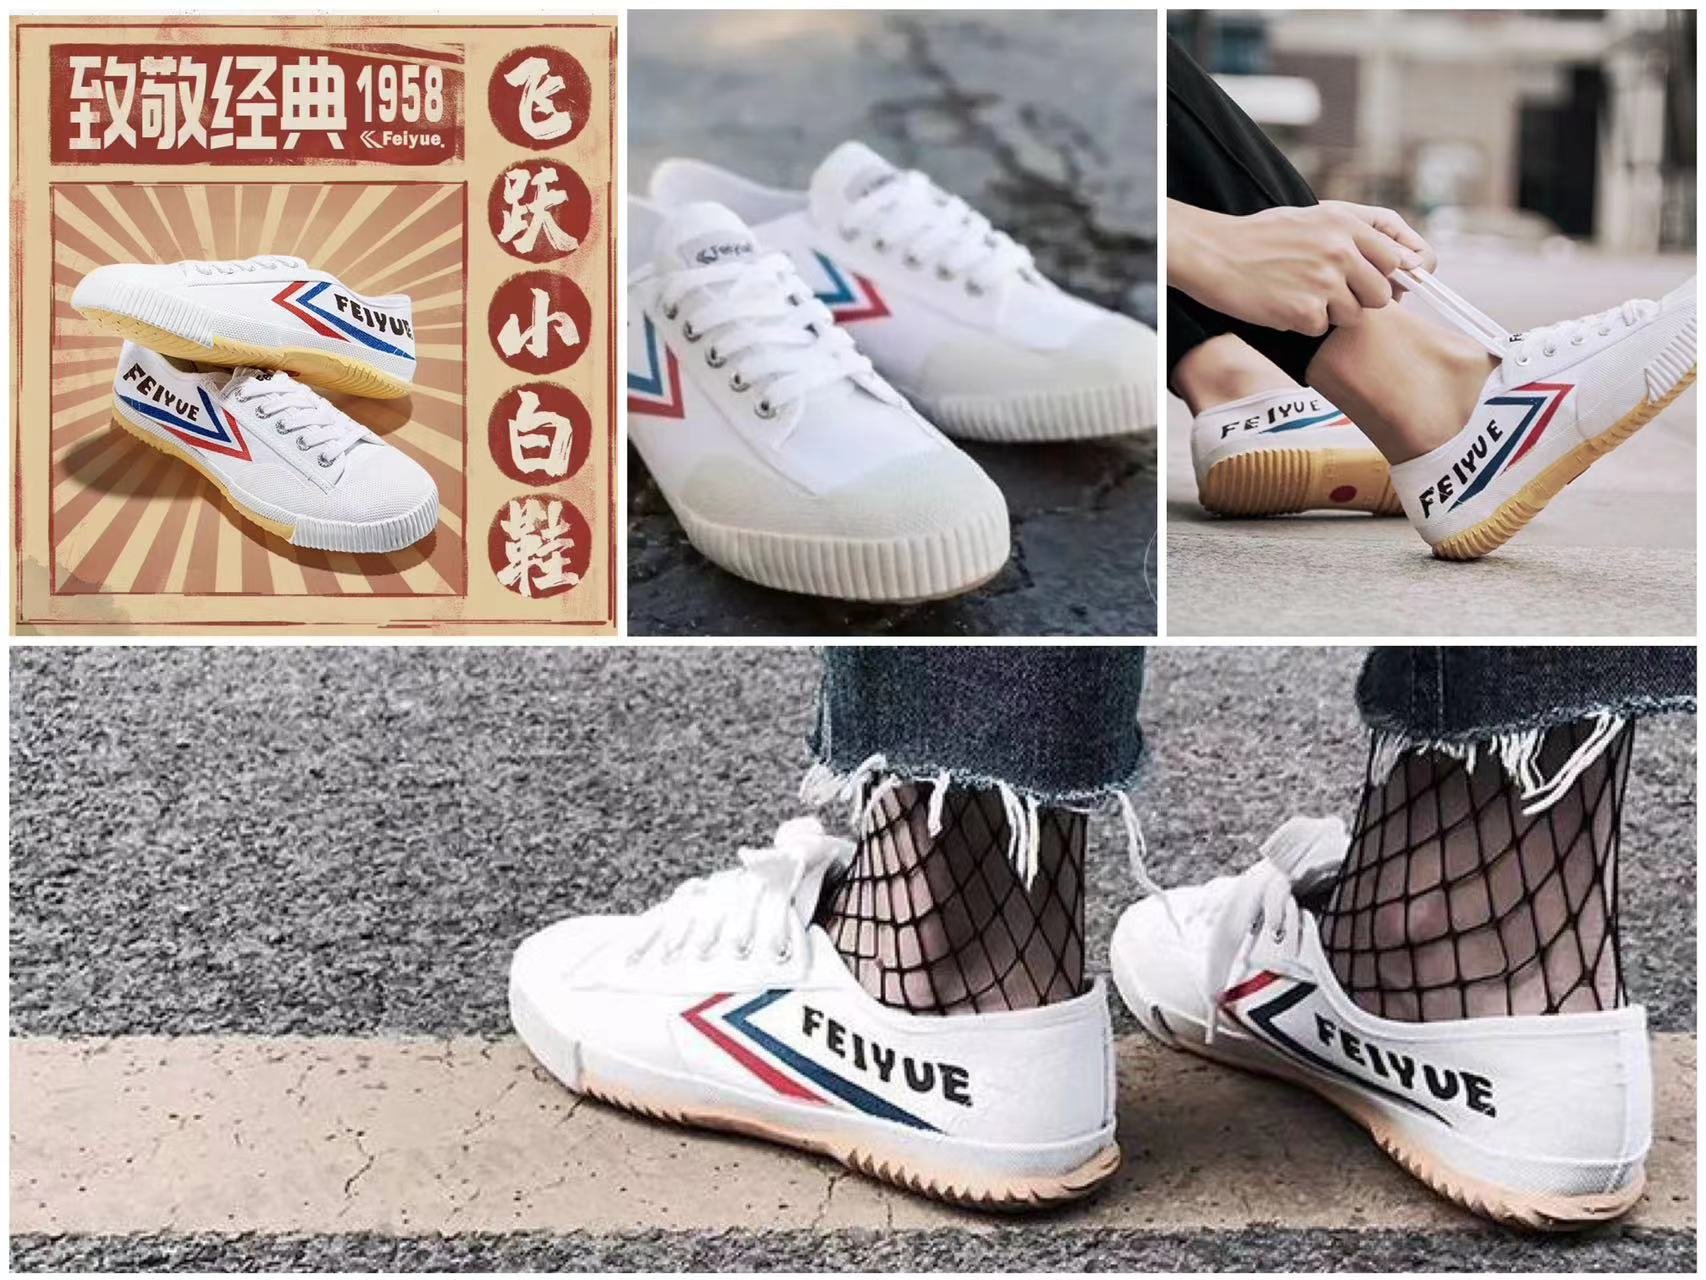 Christina Chao’s best purchase in China: 飞跃 [Fēiyuè] shoes